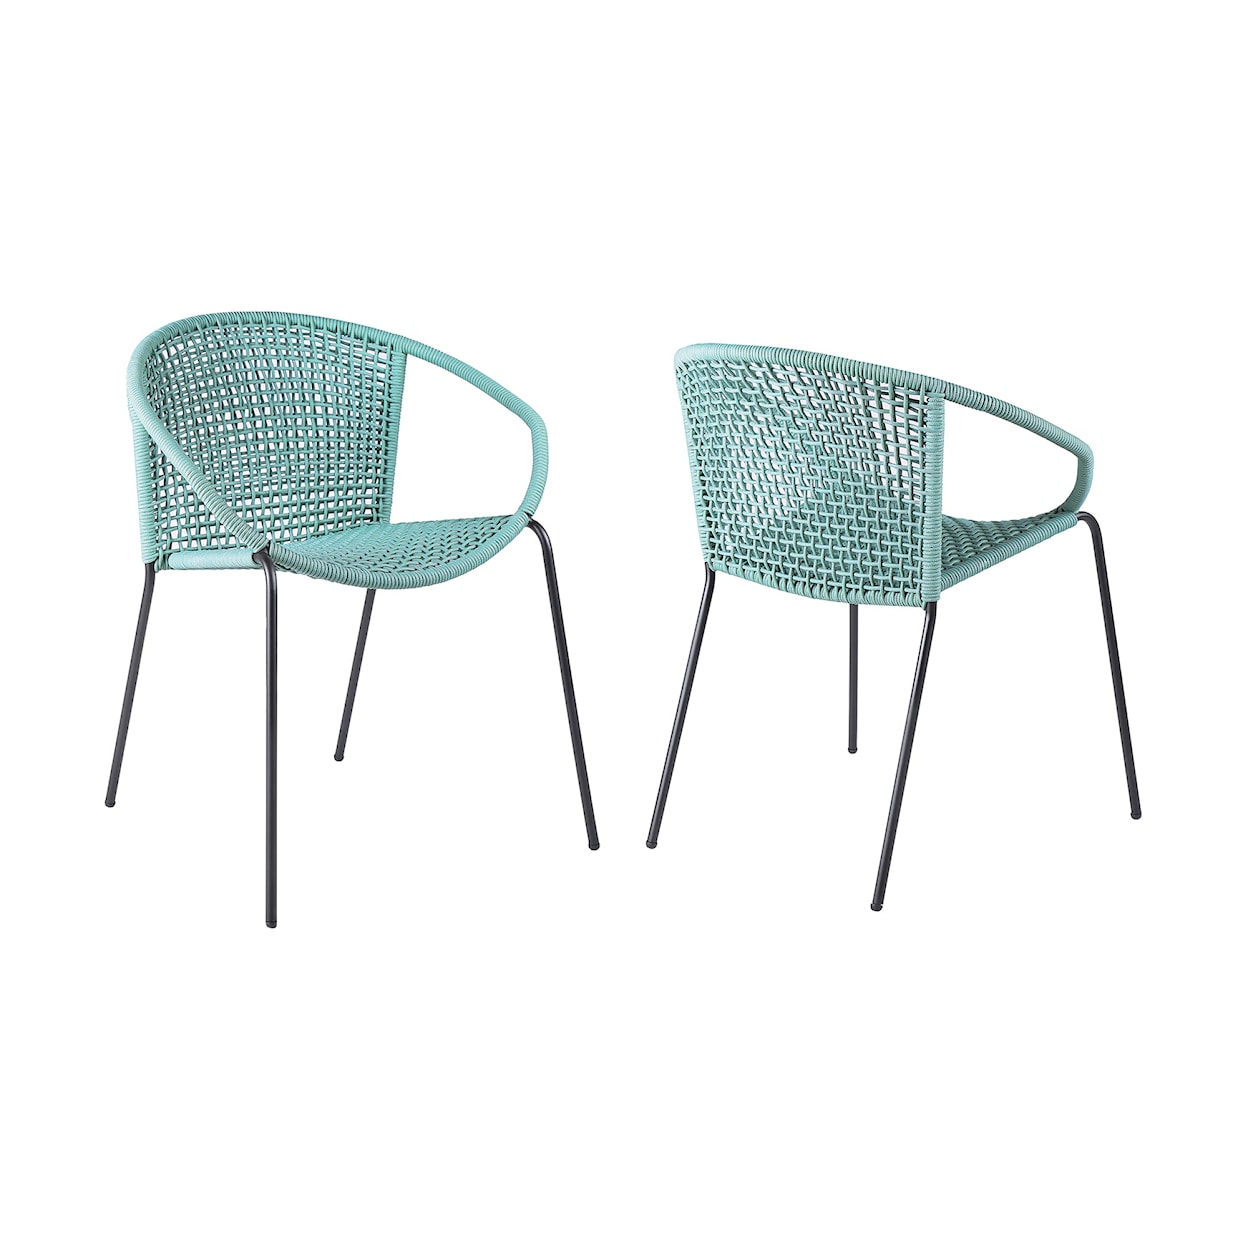 Armen Living Snack Outdoor Dining Chair